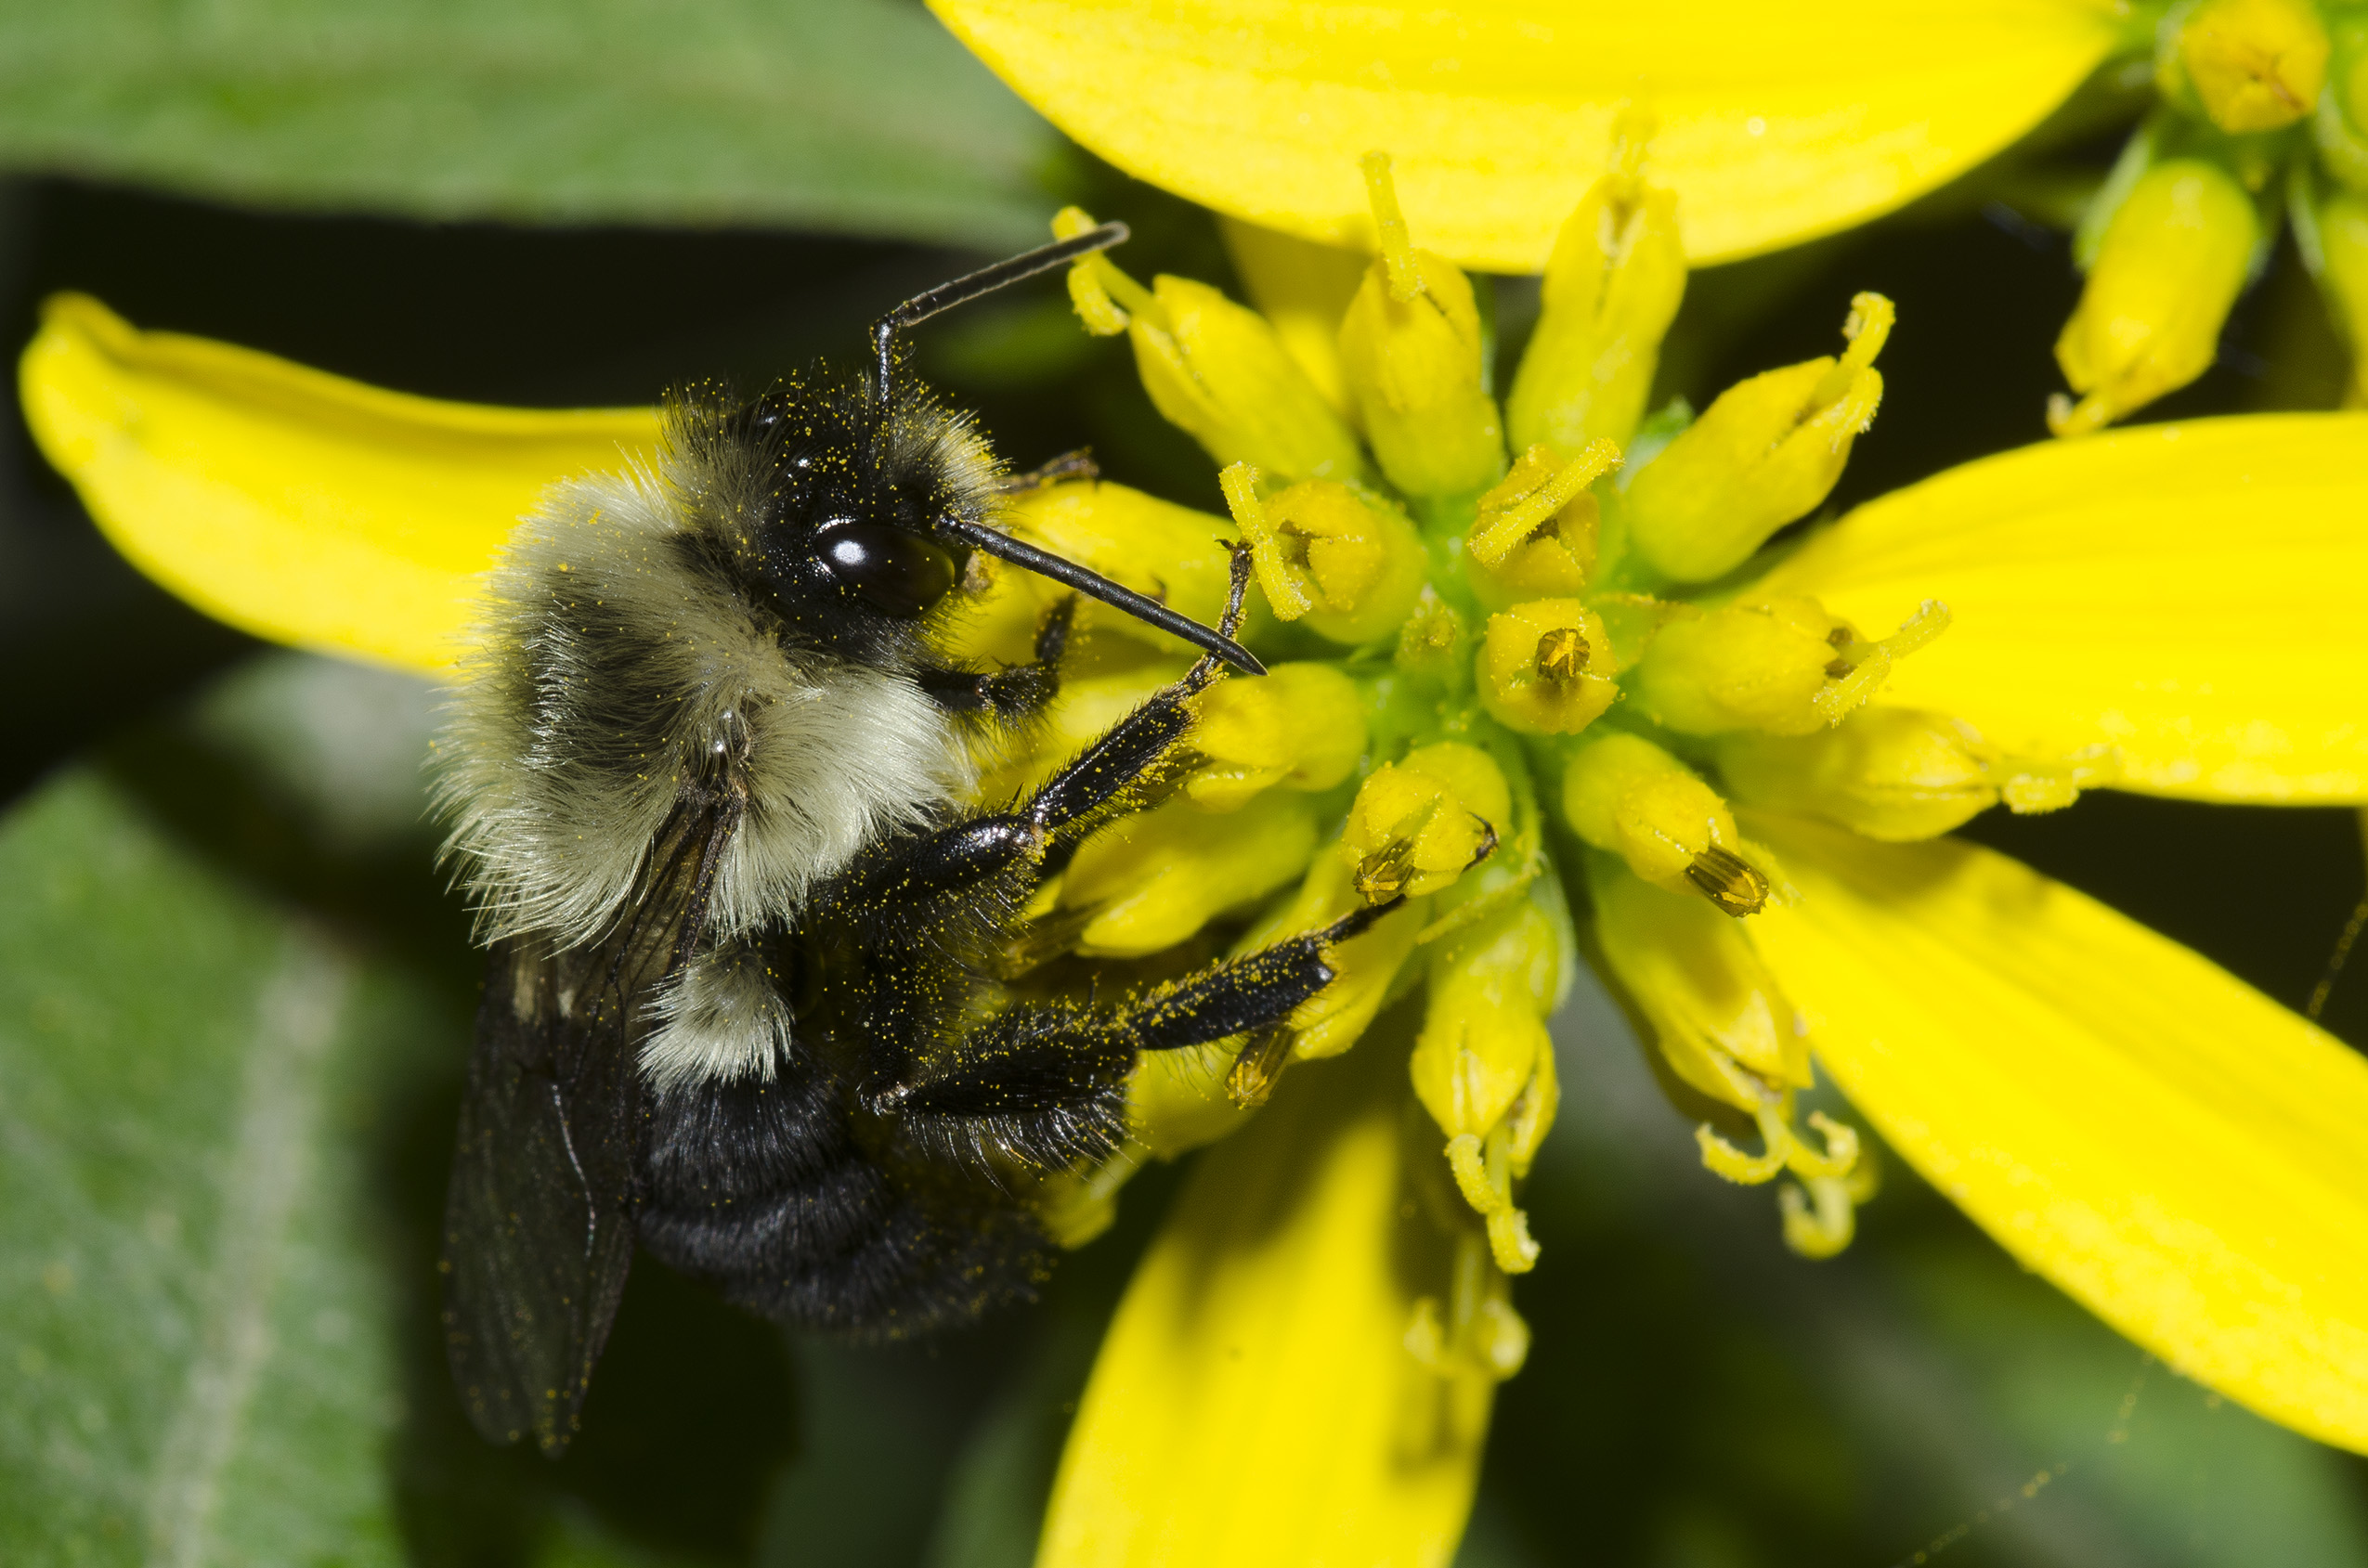 A hairy, black and yellow bumble bee drinks nectar from a yellow flower